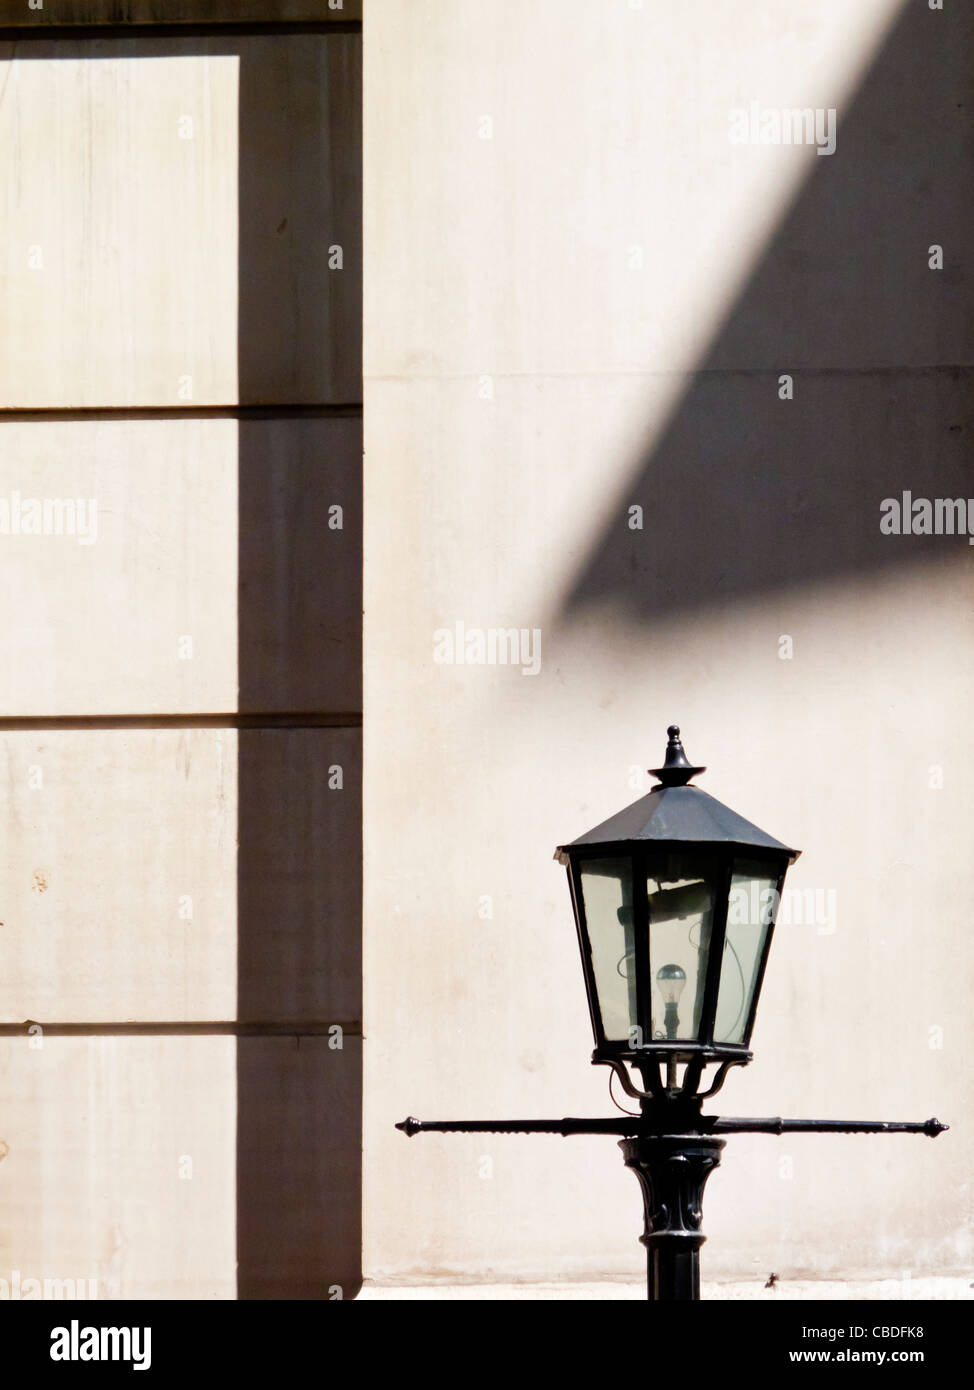 Traditional style street lamp with shadow on wall behind in the City of London UK Stock Photo